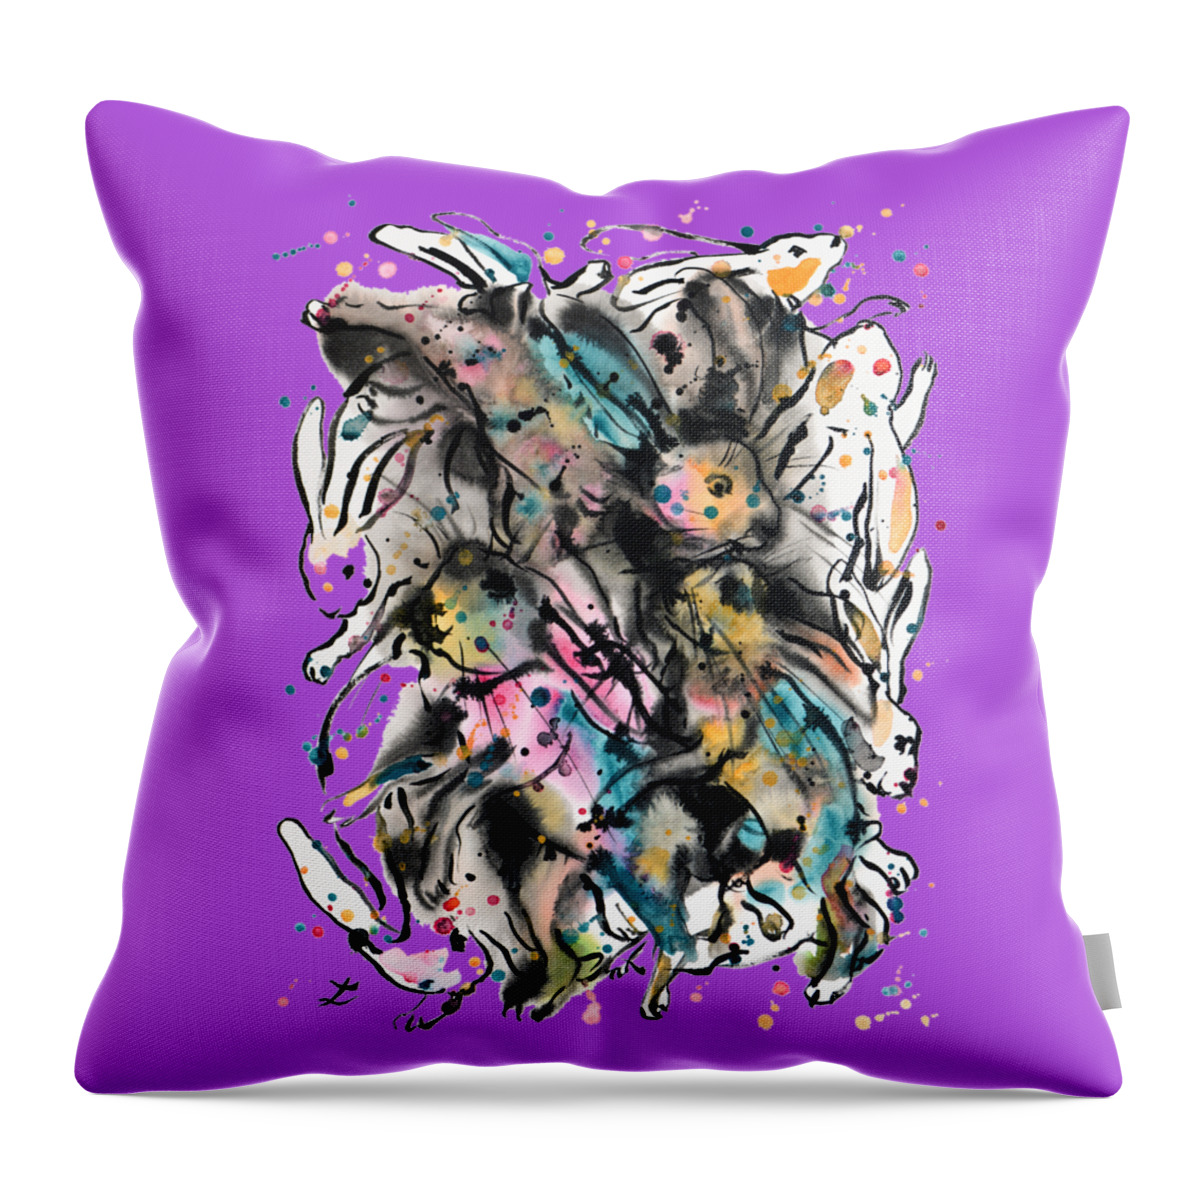 Hare Throw Pillow featuring the painting March Hares by Zaira Dzhaubaeva